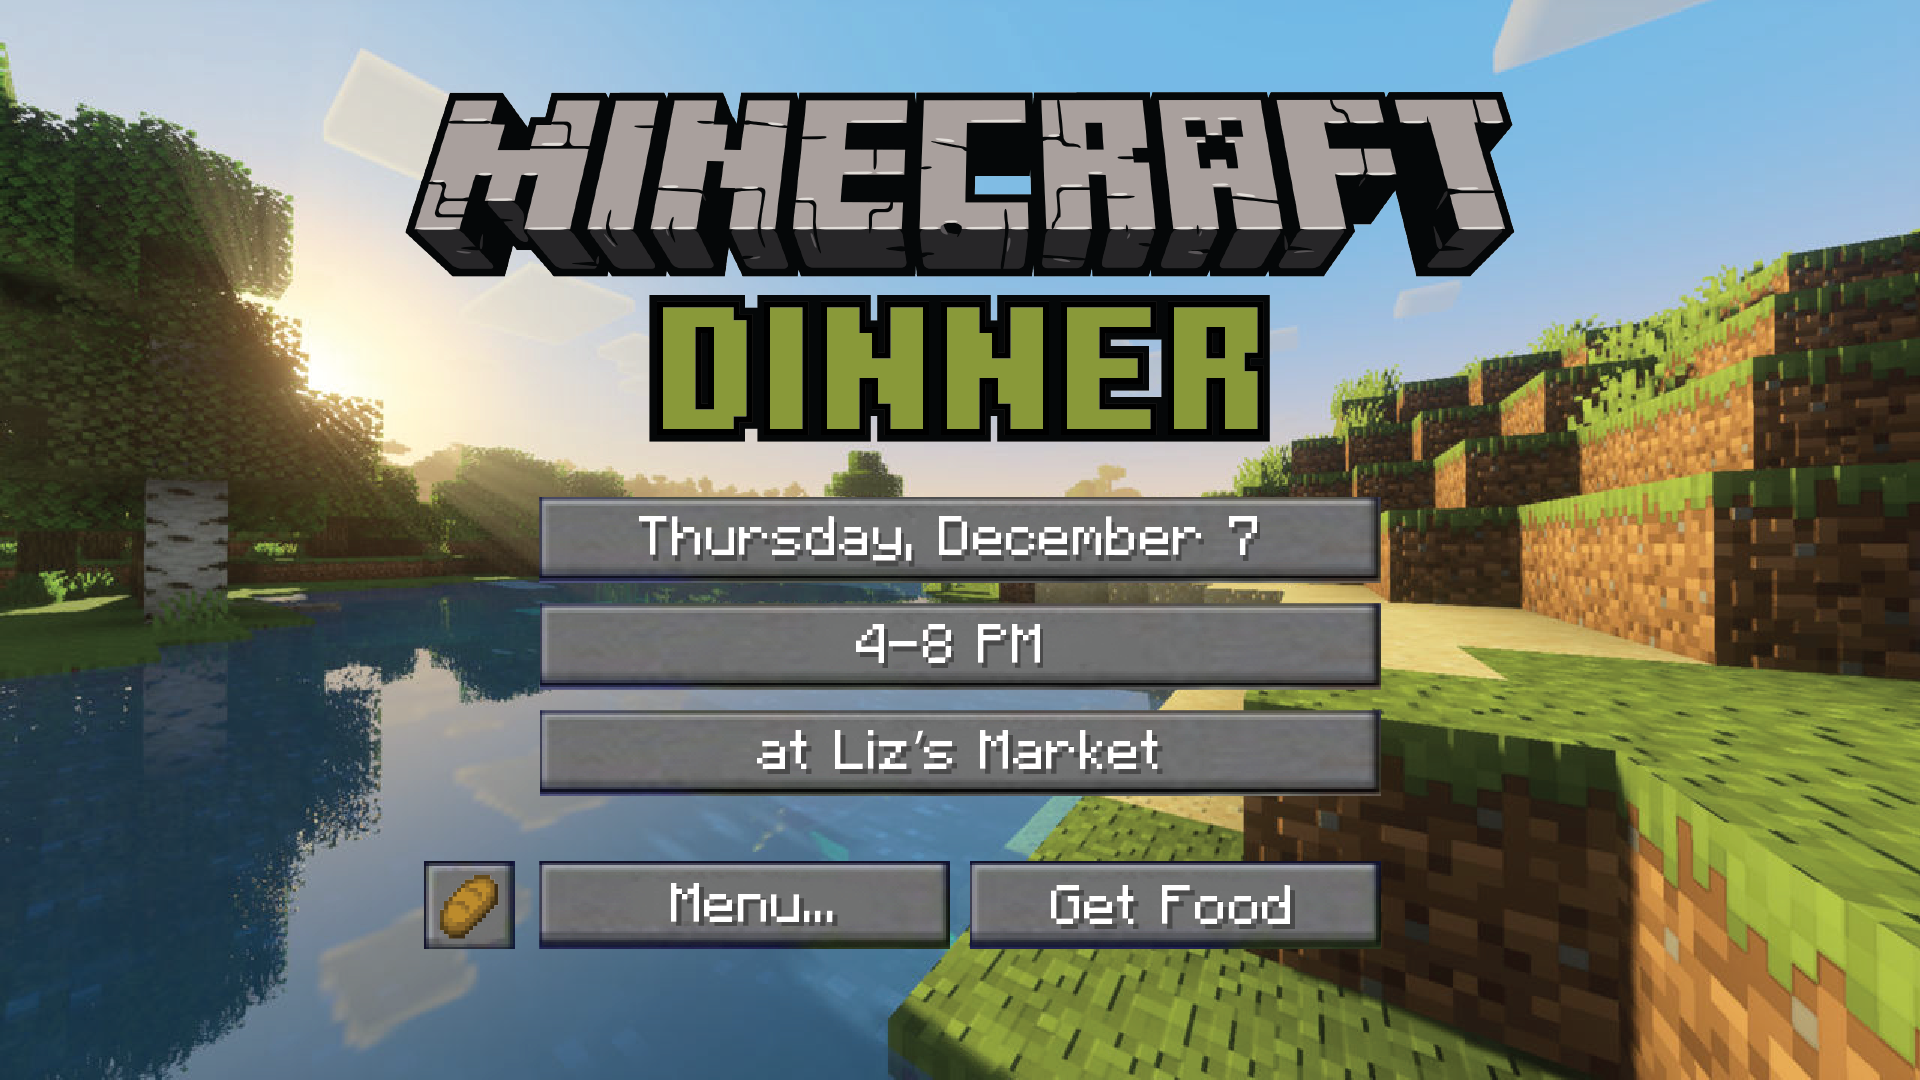 Minecraft on X: Have you tried hosting a dinner party in Minecraft? We've  cooked up some great recipes, decor and more (and fixed the link!) to help  you make it the best